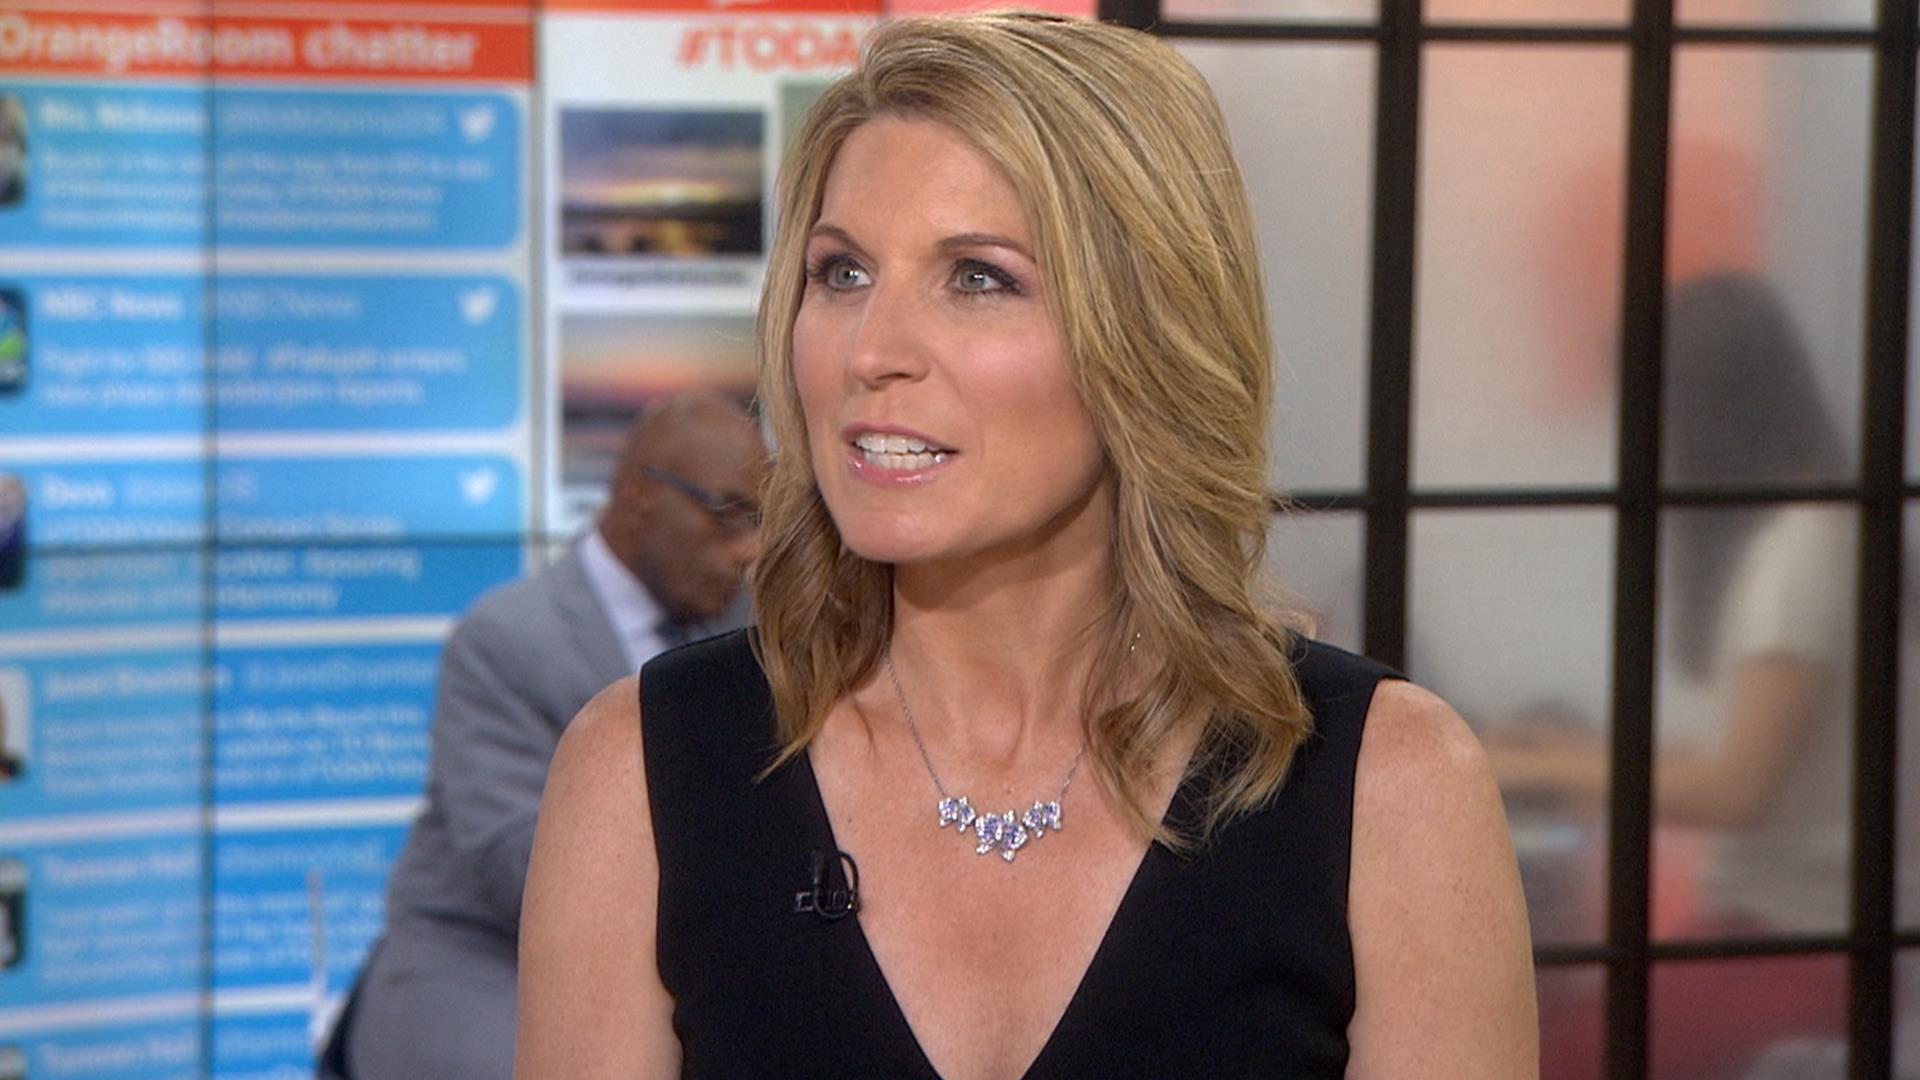 NBC political analyst Nicolle Wallace joins TODAY to talk about Hillary Cli...